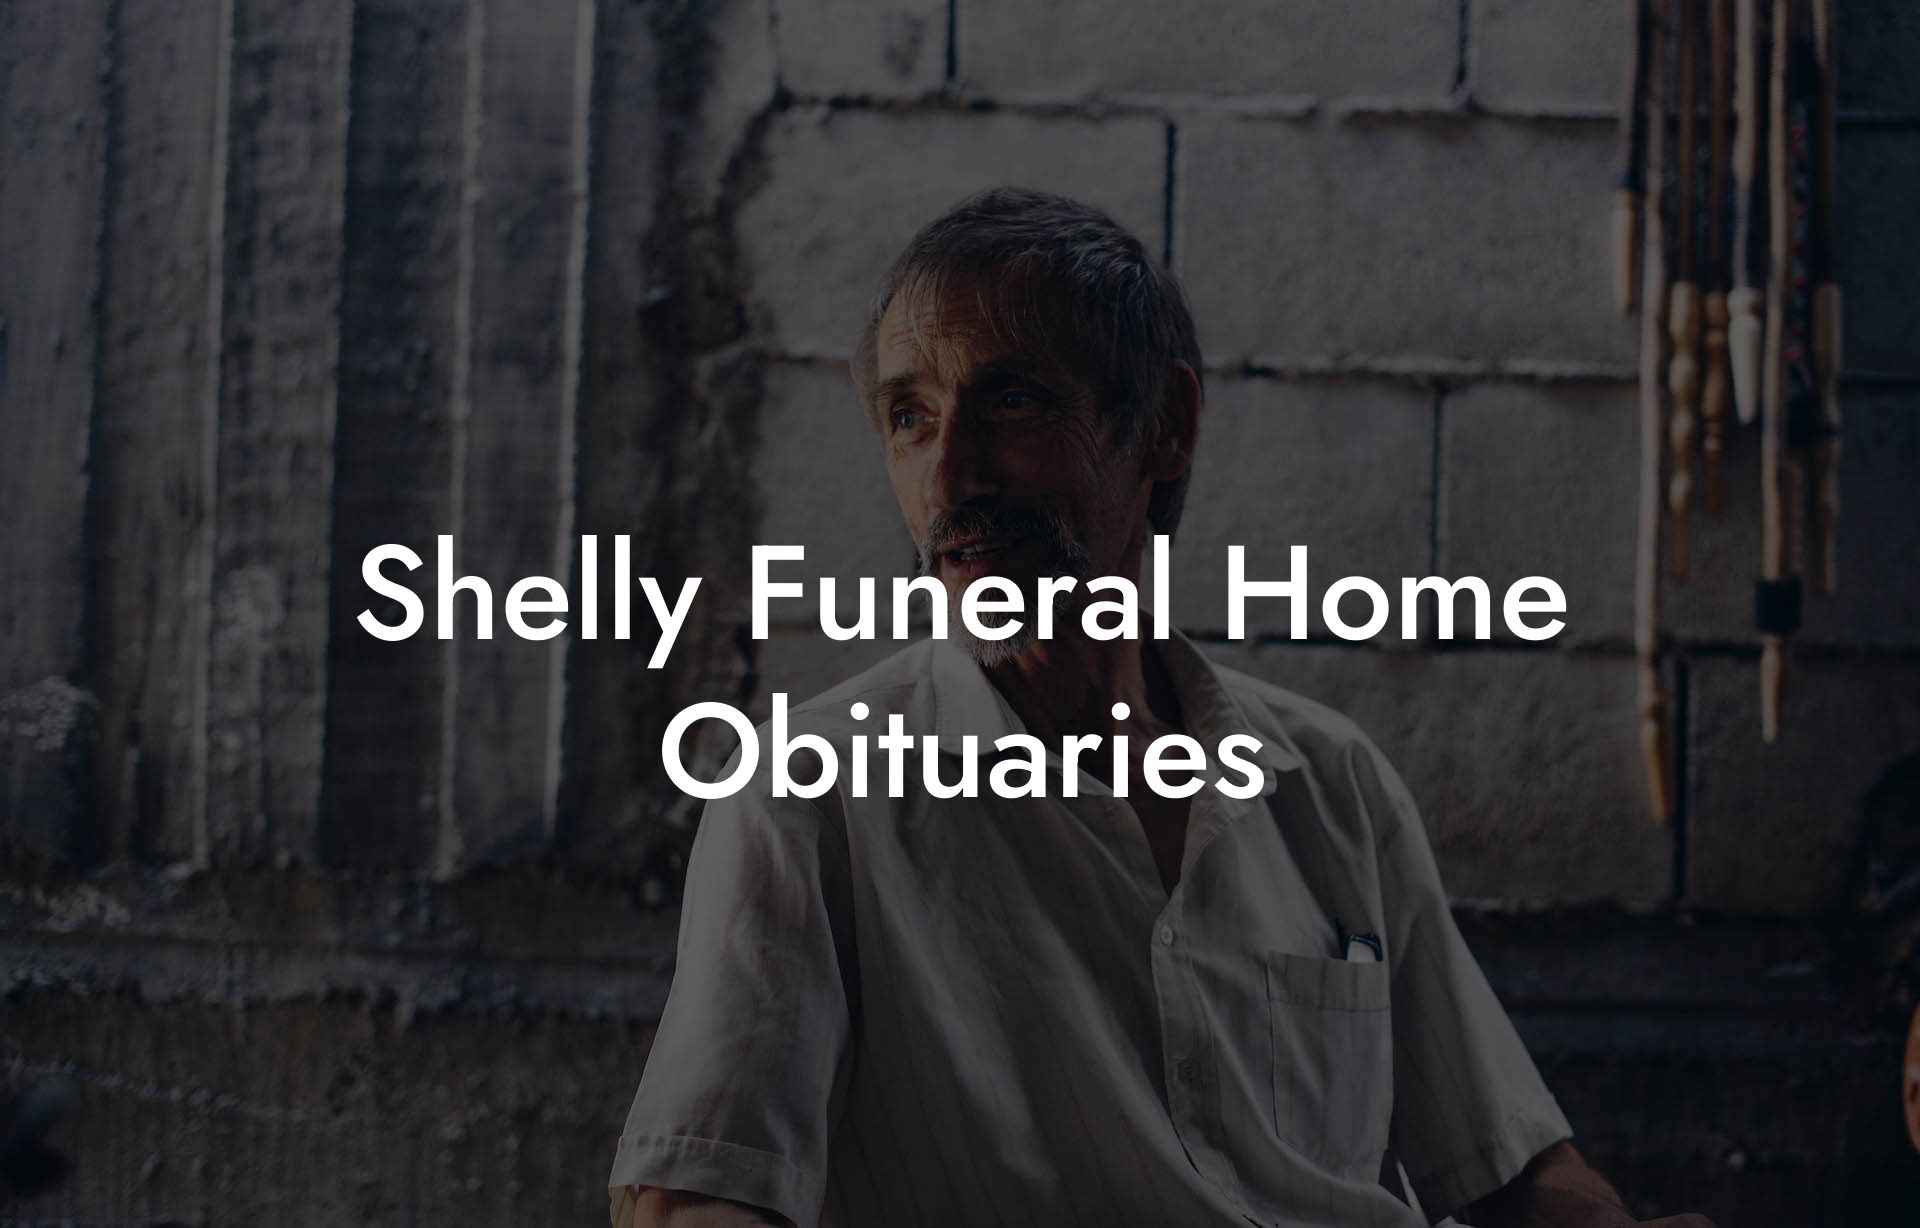 Shelly Funeral Home Obituaries